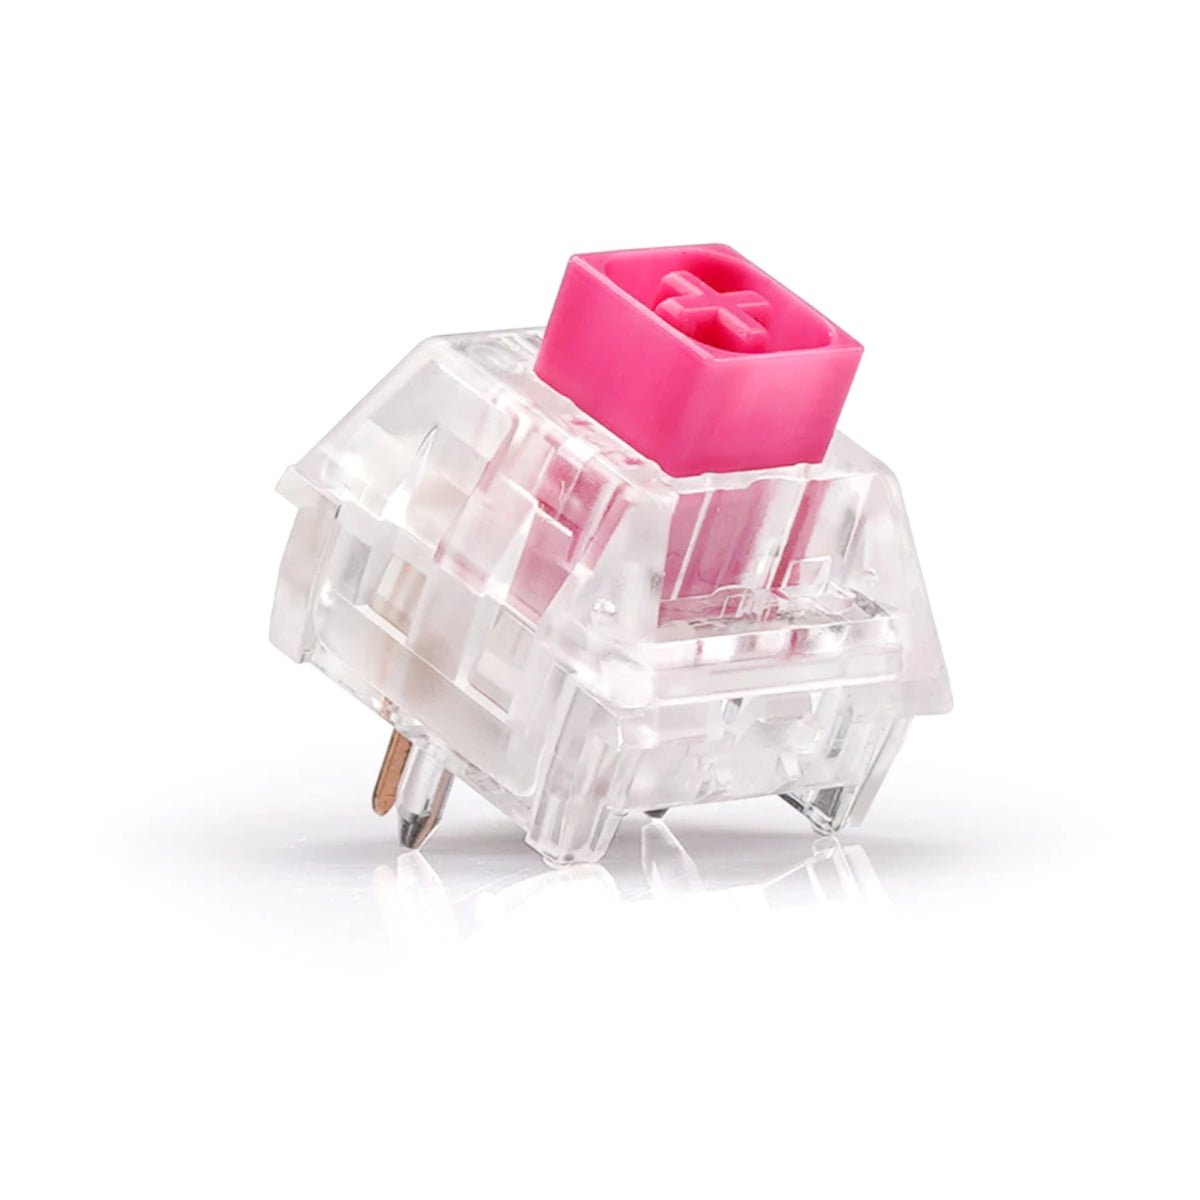 Kailh Box Crystal Switches - Pink - 10 Pieces - Store 974 | ستور ٩٧٤